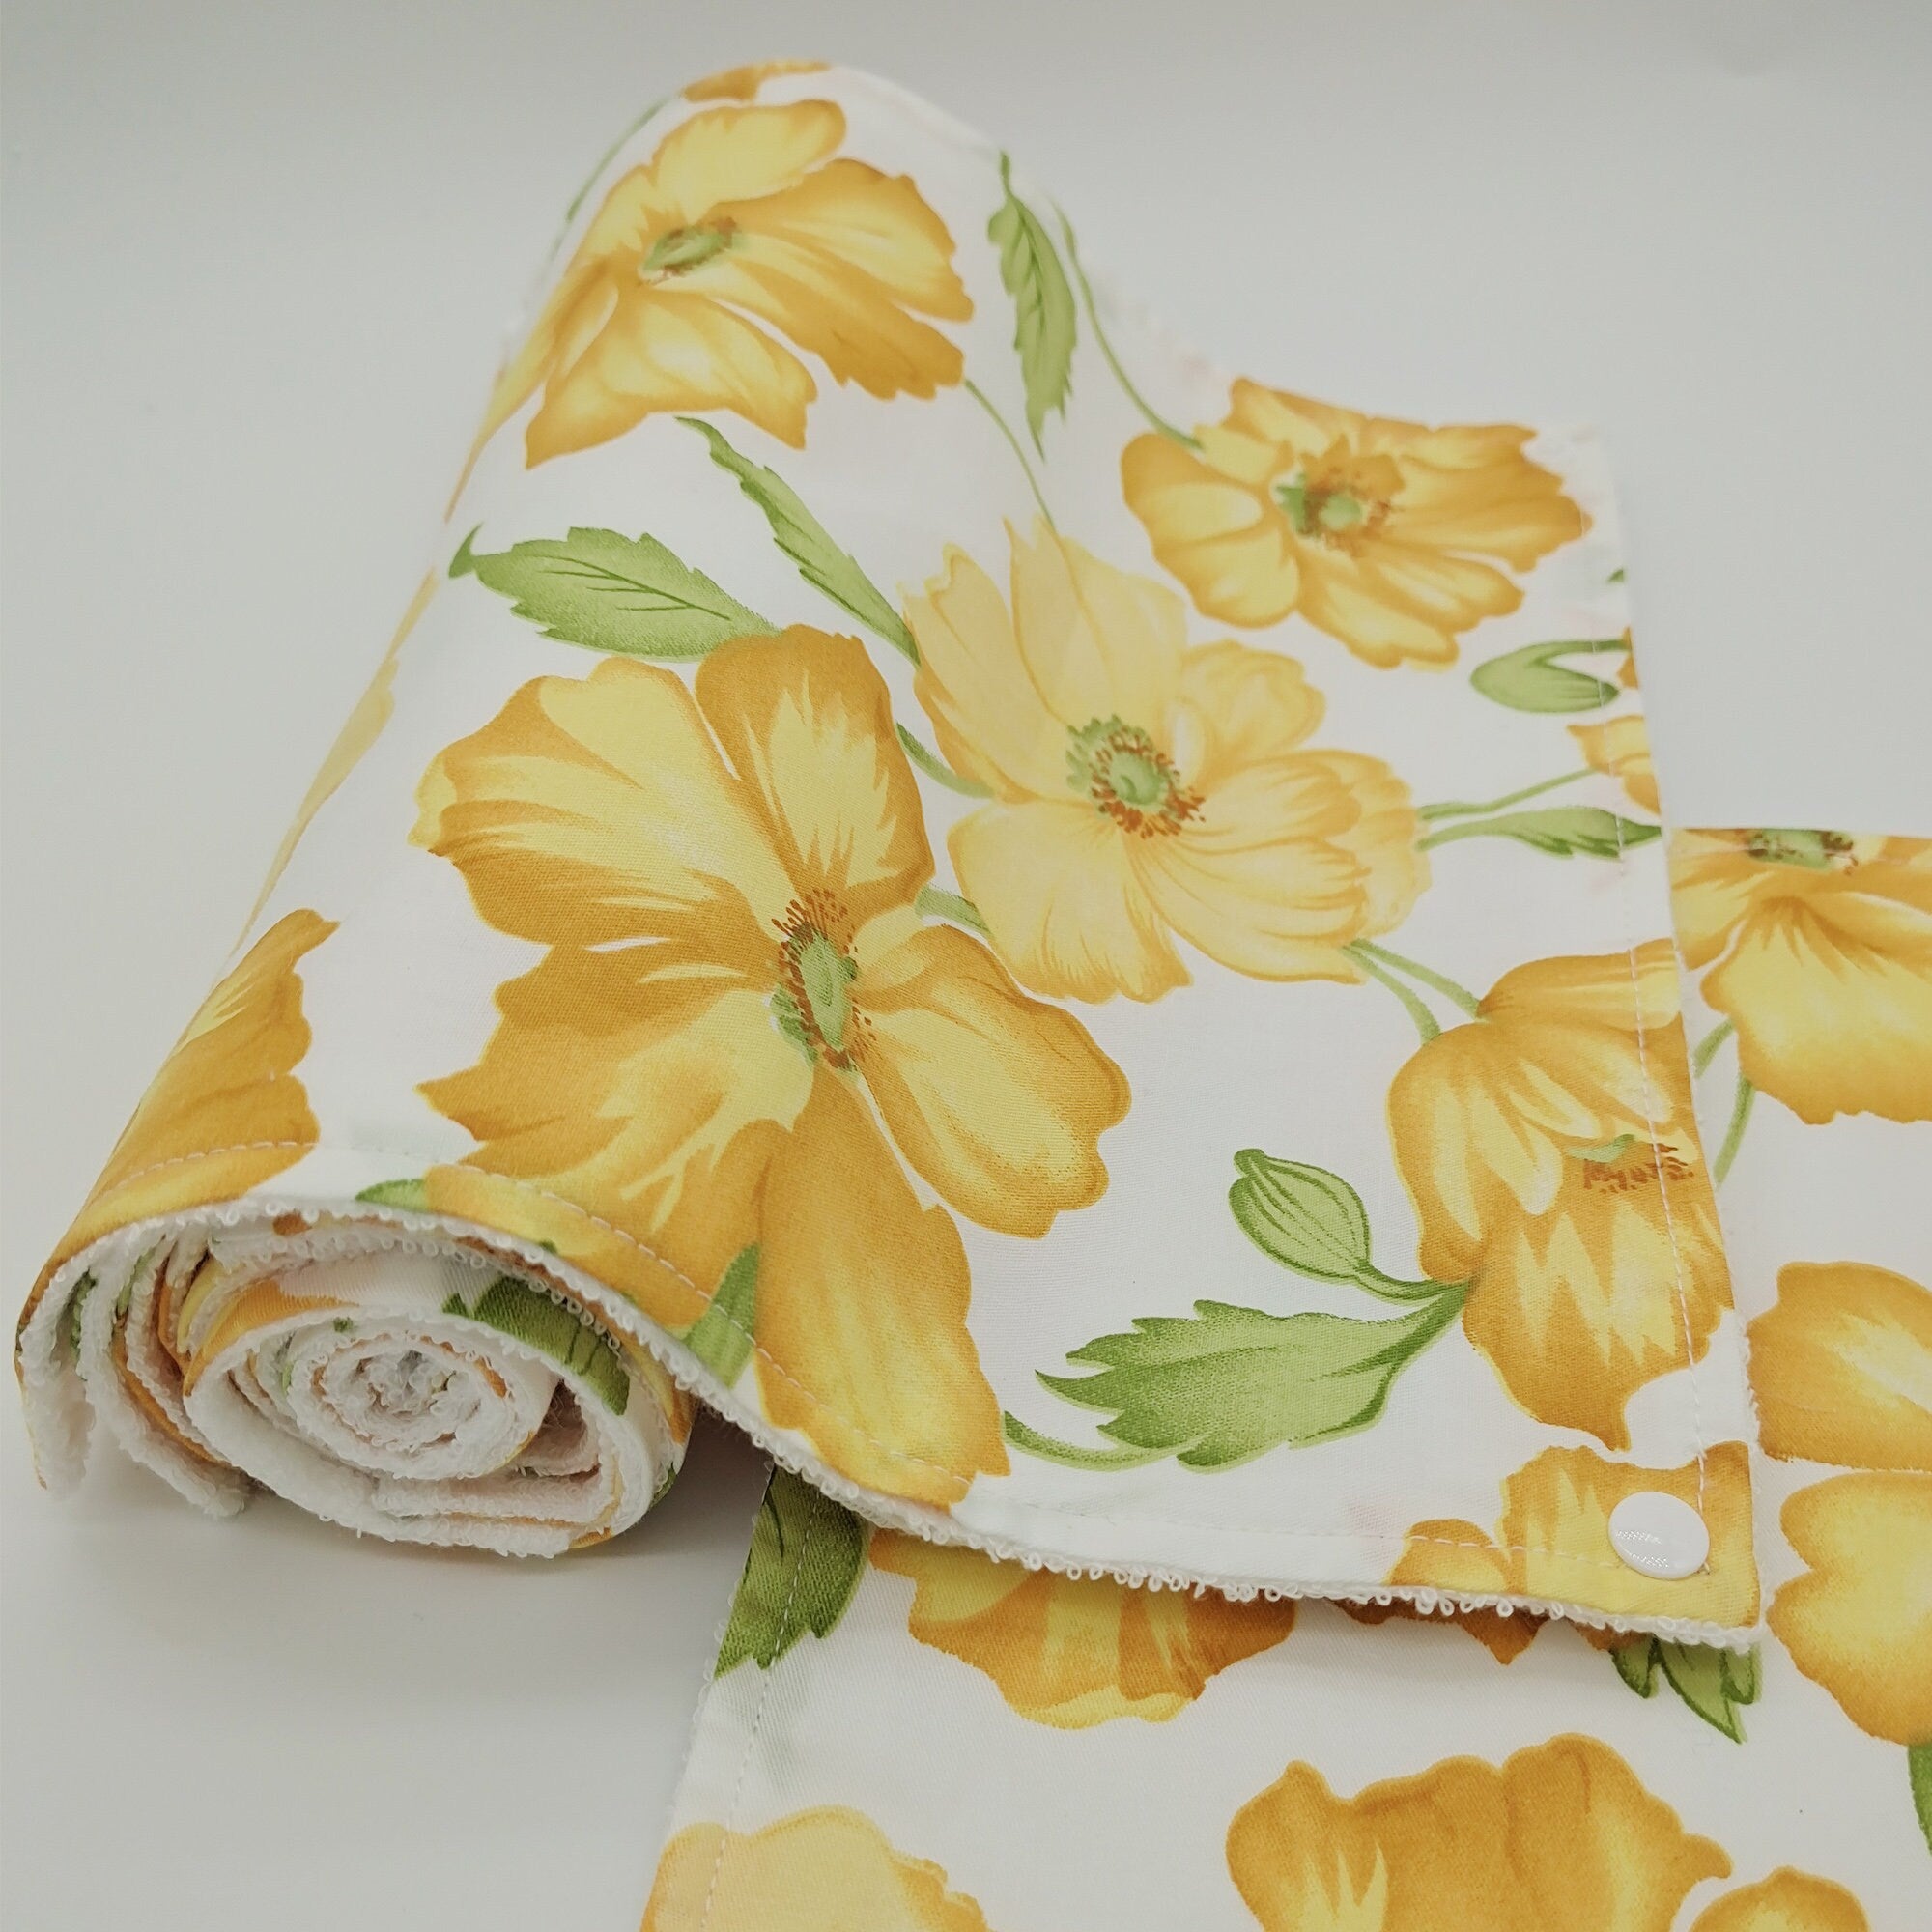 Paperless Kitchen Towels, Zero Waste,  Reusable paper towels roll with snaps，Dish Towels eco-friendly Kitchen Clothes Yellow flowers